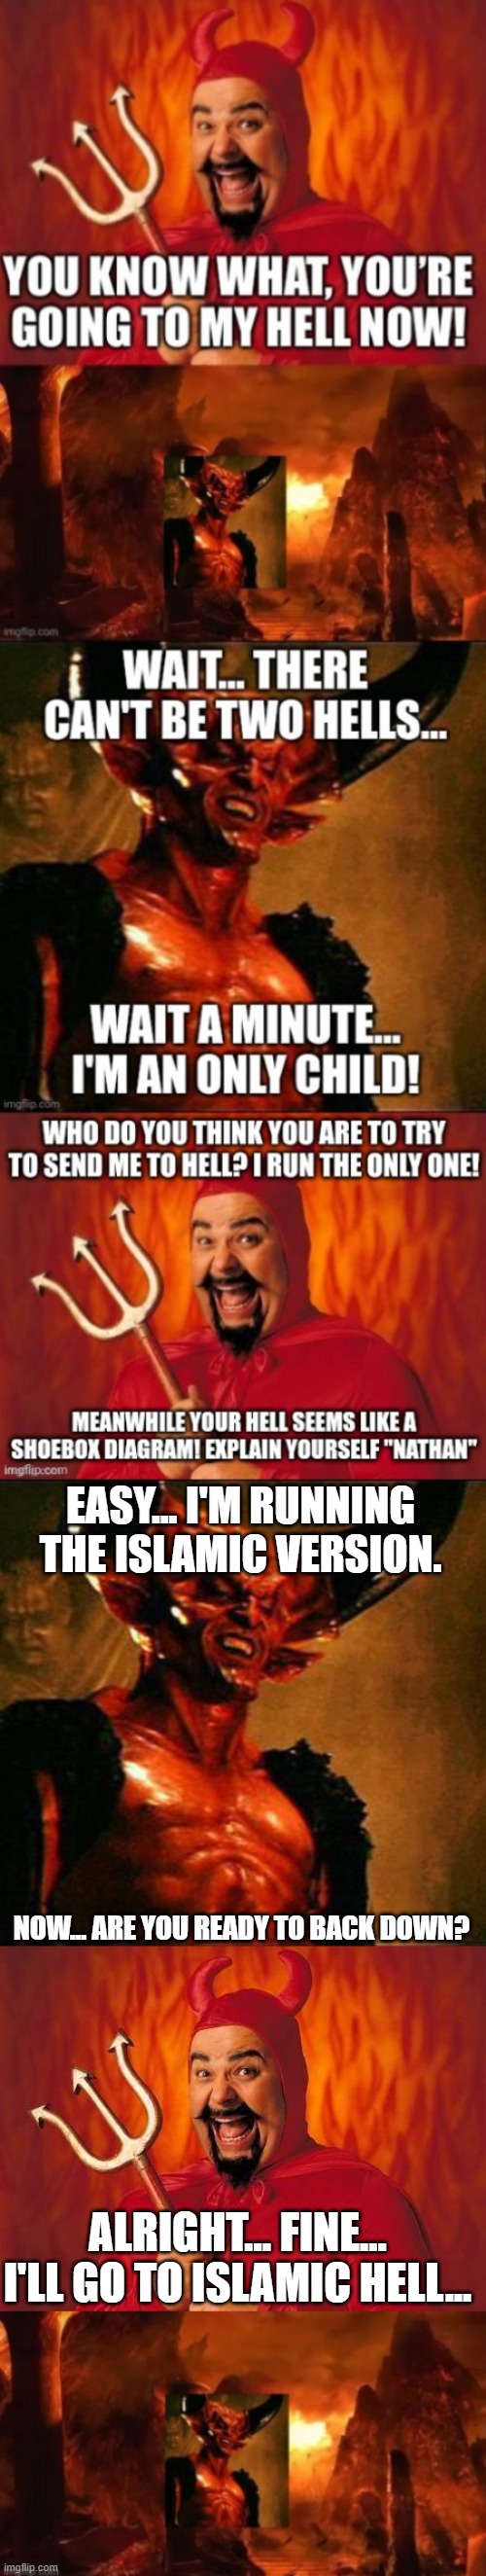 Satan runs the Christian and Jewish version of hell, Nathan runs the Islamic version | EASY... I'M RUNNING THE ISLAMIC VERSION. NOW... ARE YOU READY TO BACK DOWN? ALRIGHT... FINE... I'LL GO TO ISLAMIC HELL... | image tagged in satan,funny satan | made w/ Imgflip meme maker